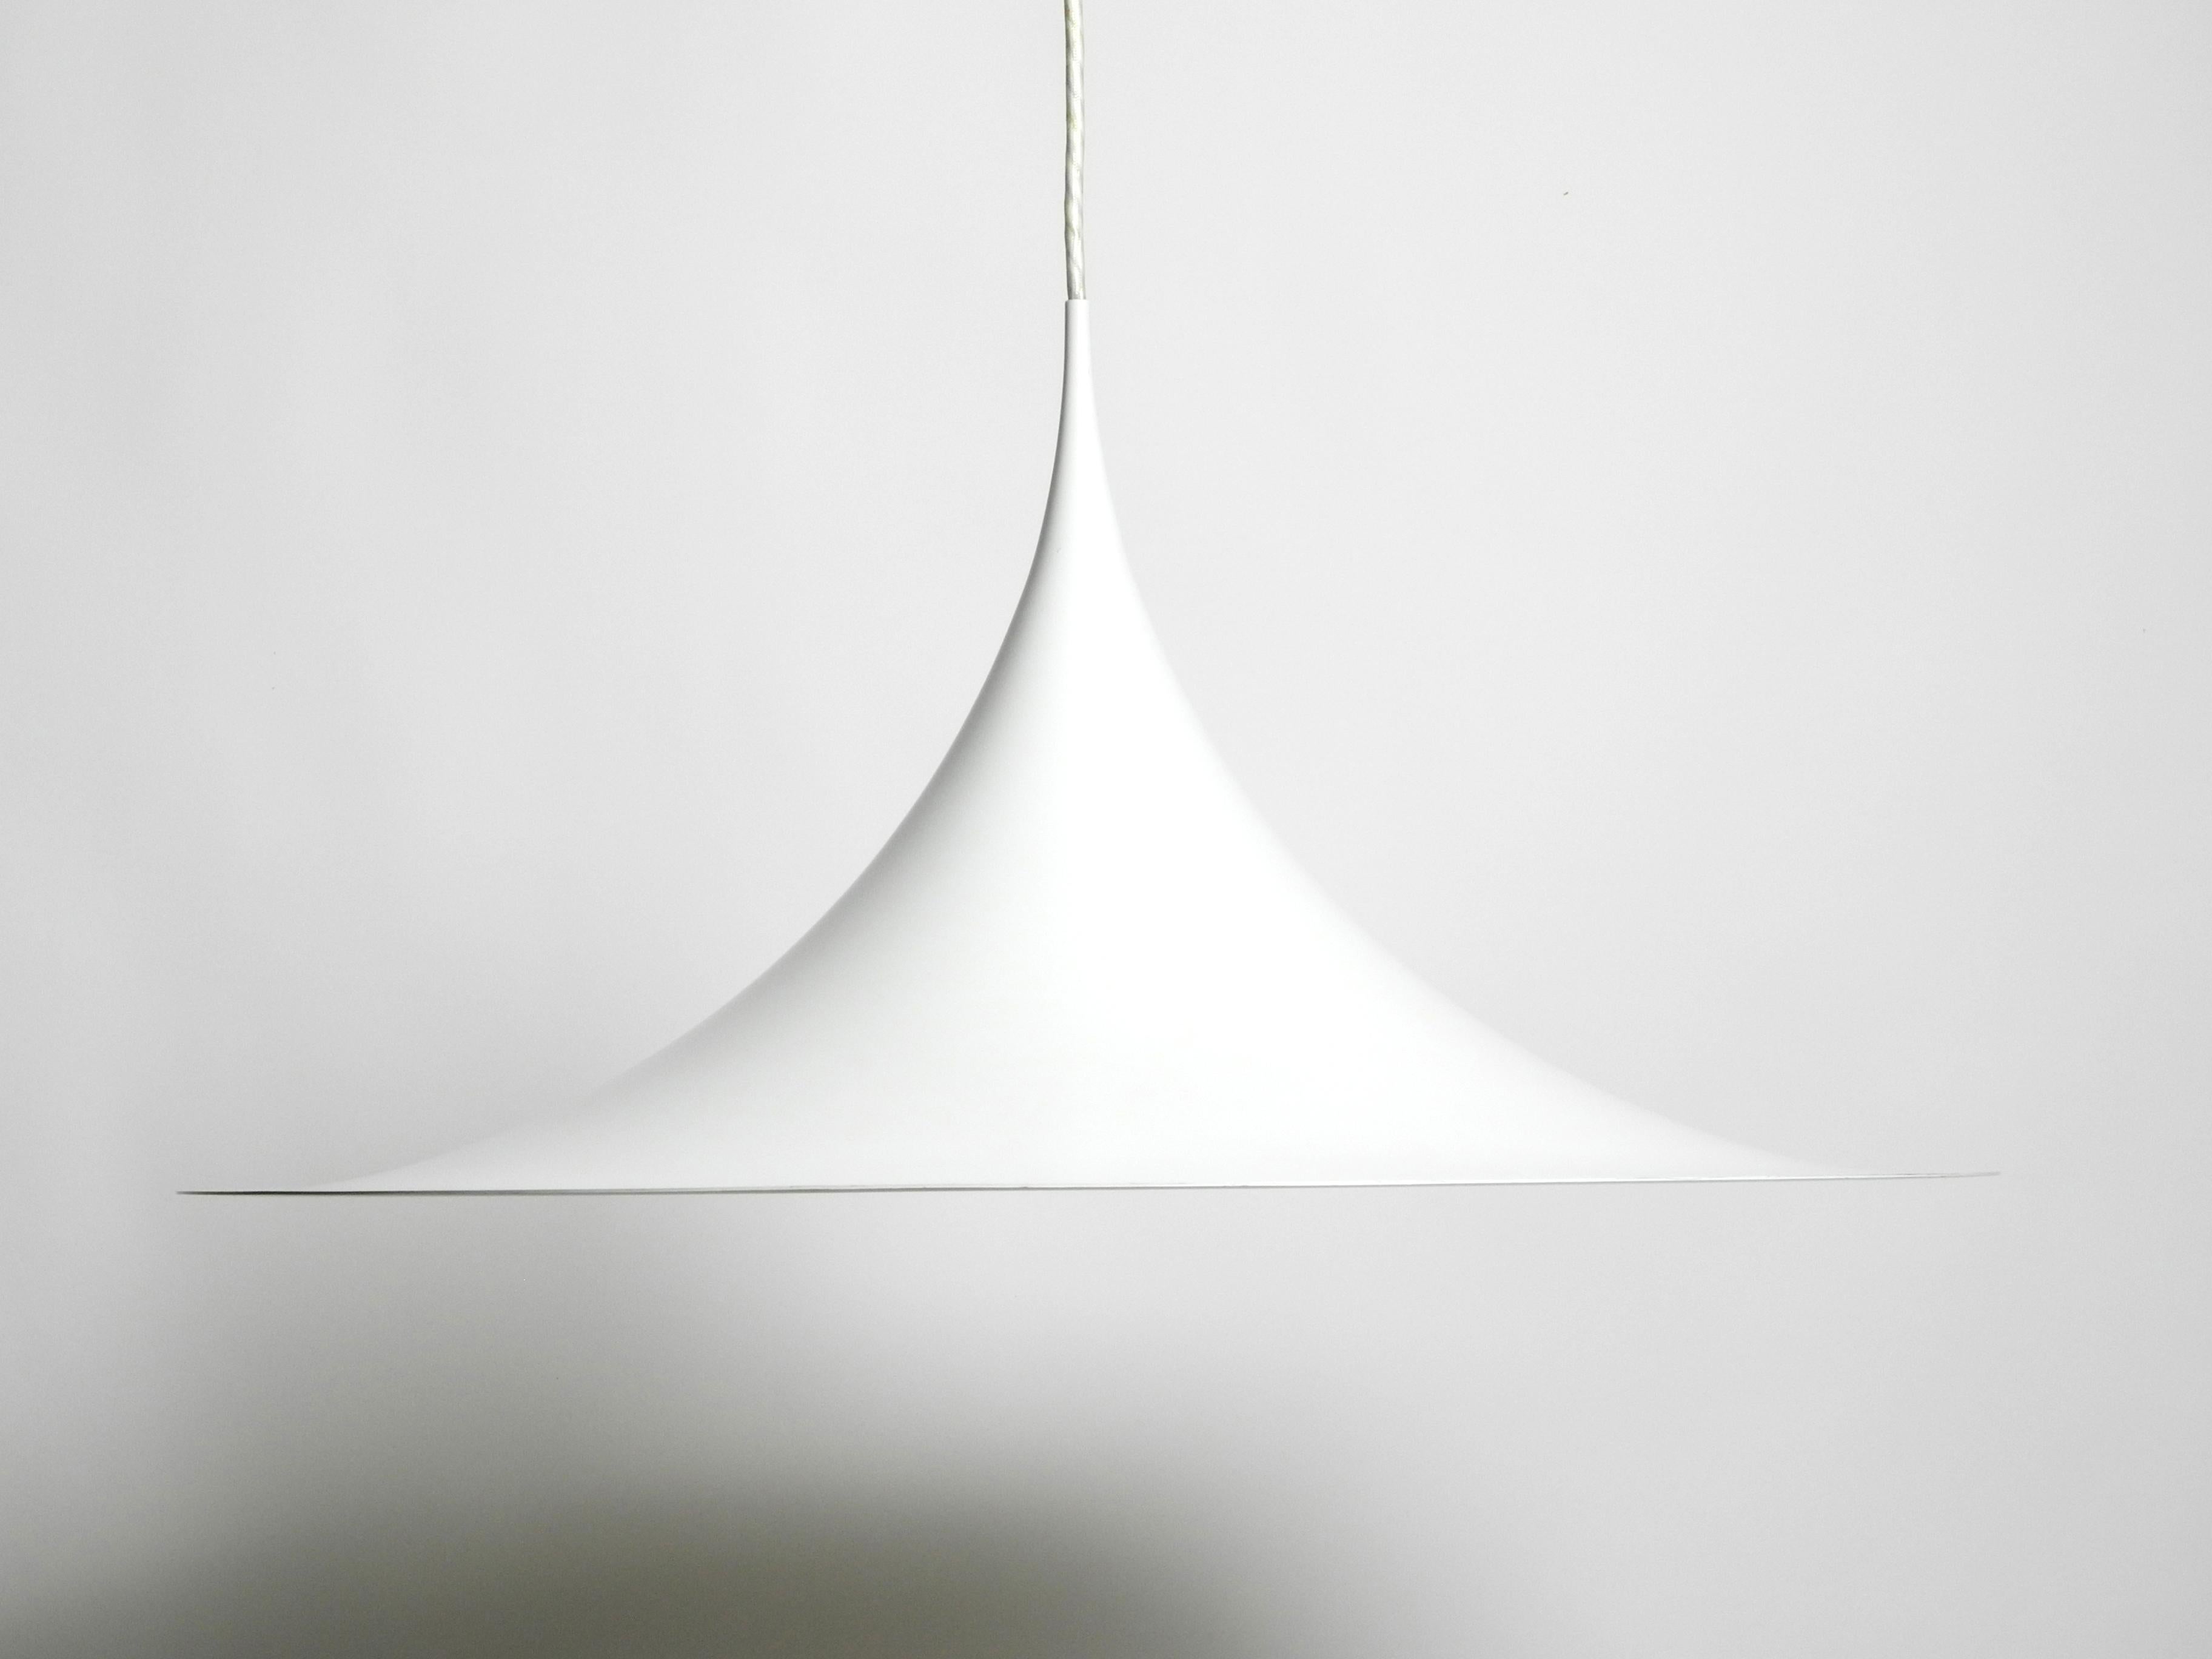 Original XXL 1970s Fog & Morup hanging lamp Semi. With a 70 cm diameter shade.
Painted entirely in white. Very good vintage condition with no damage.
No bumps or dents, very clean and not wavy metal shade.
Design: Thorsten Thorup/ Claus